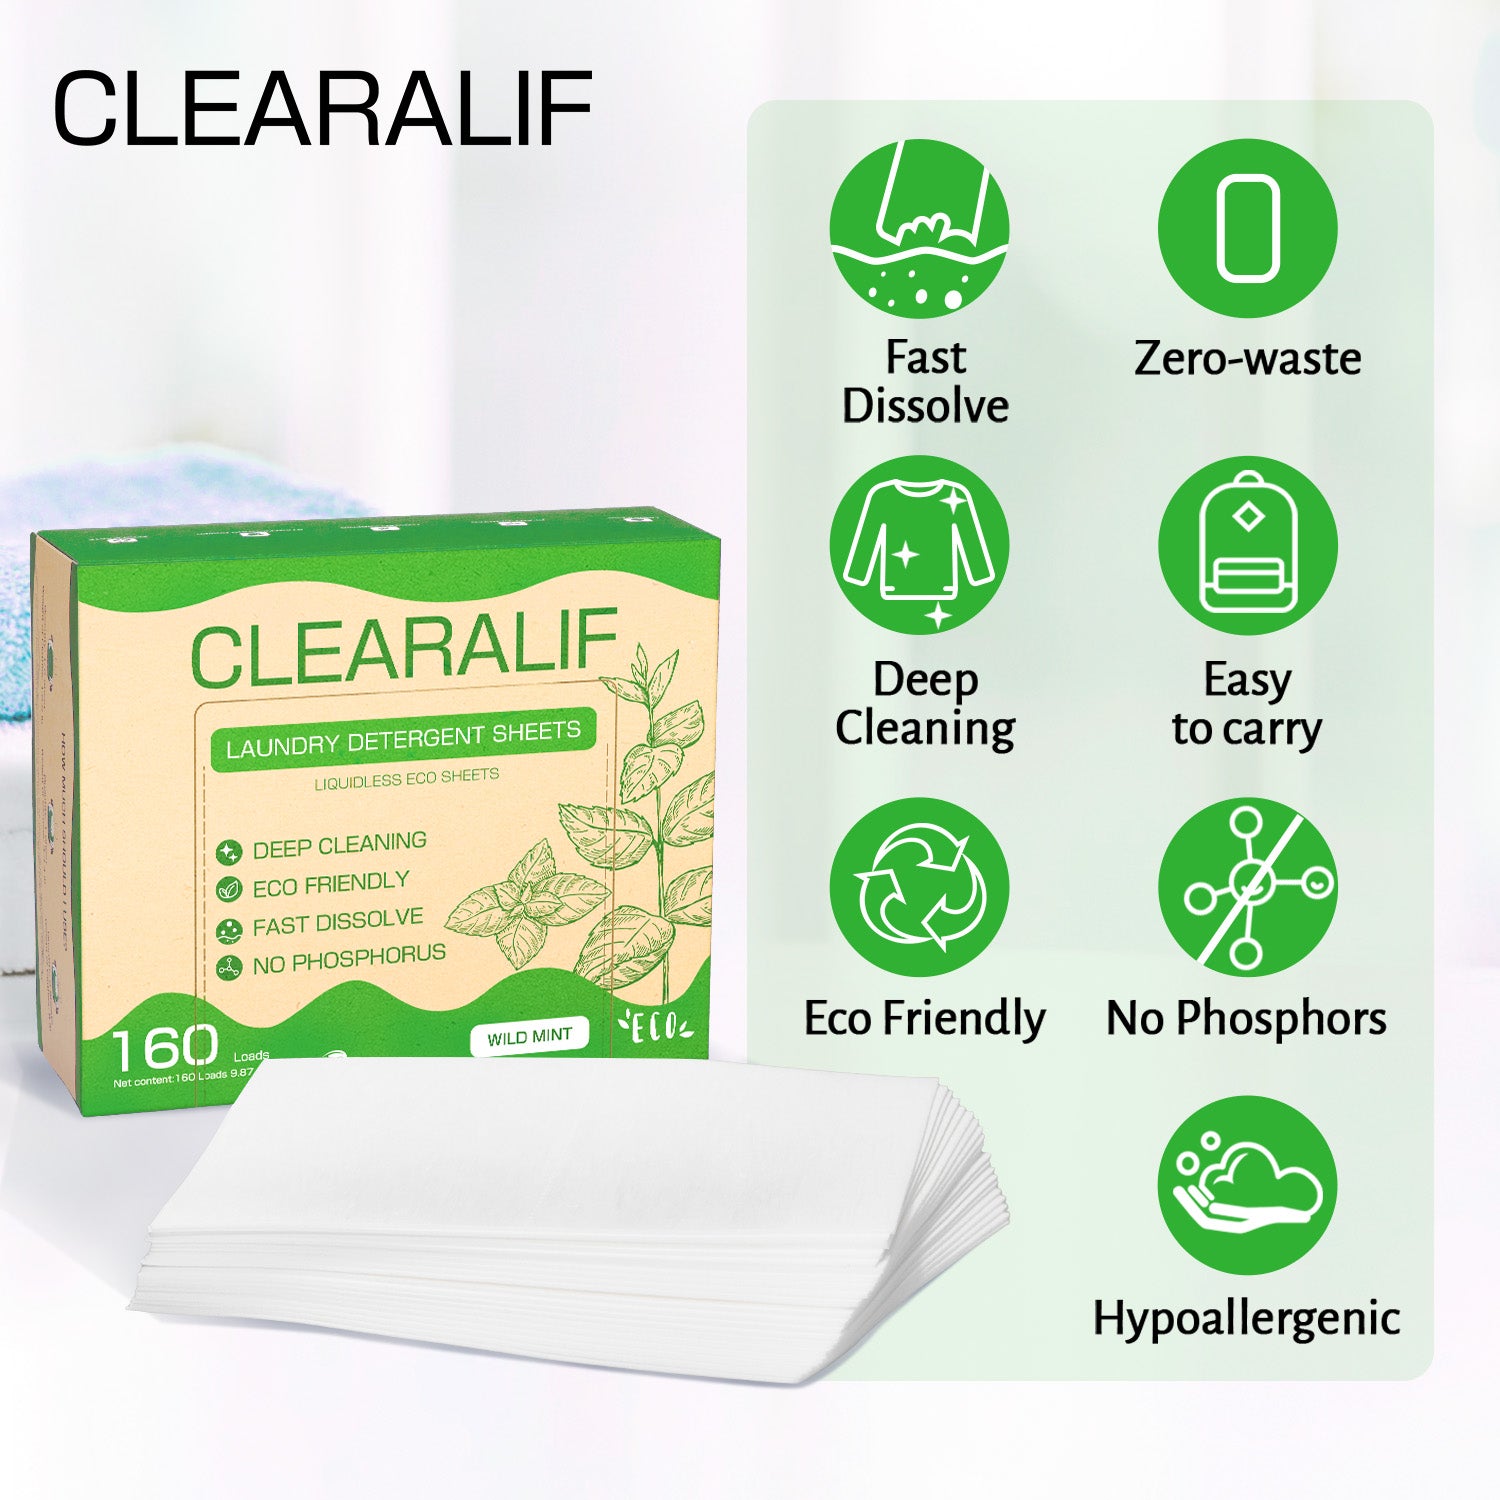 CLEARALIF Laundry Detergent Sheets Wild Mint